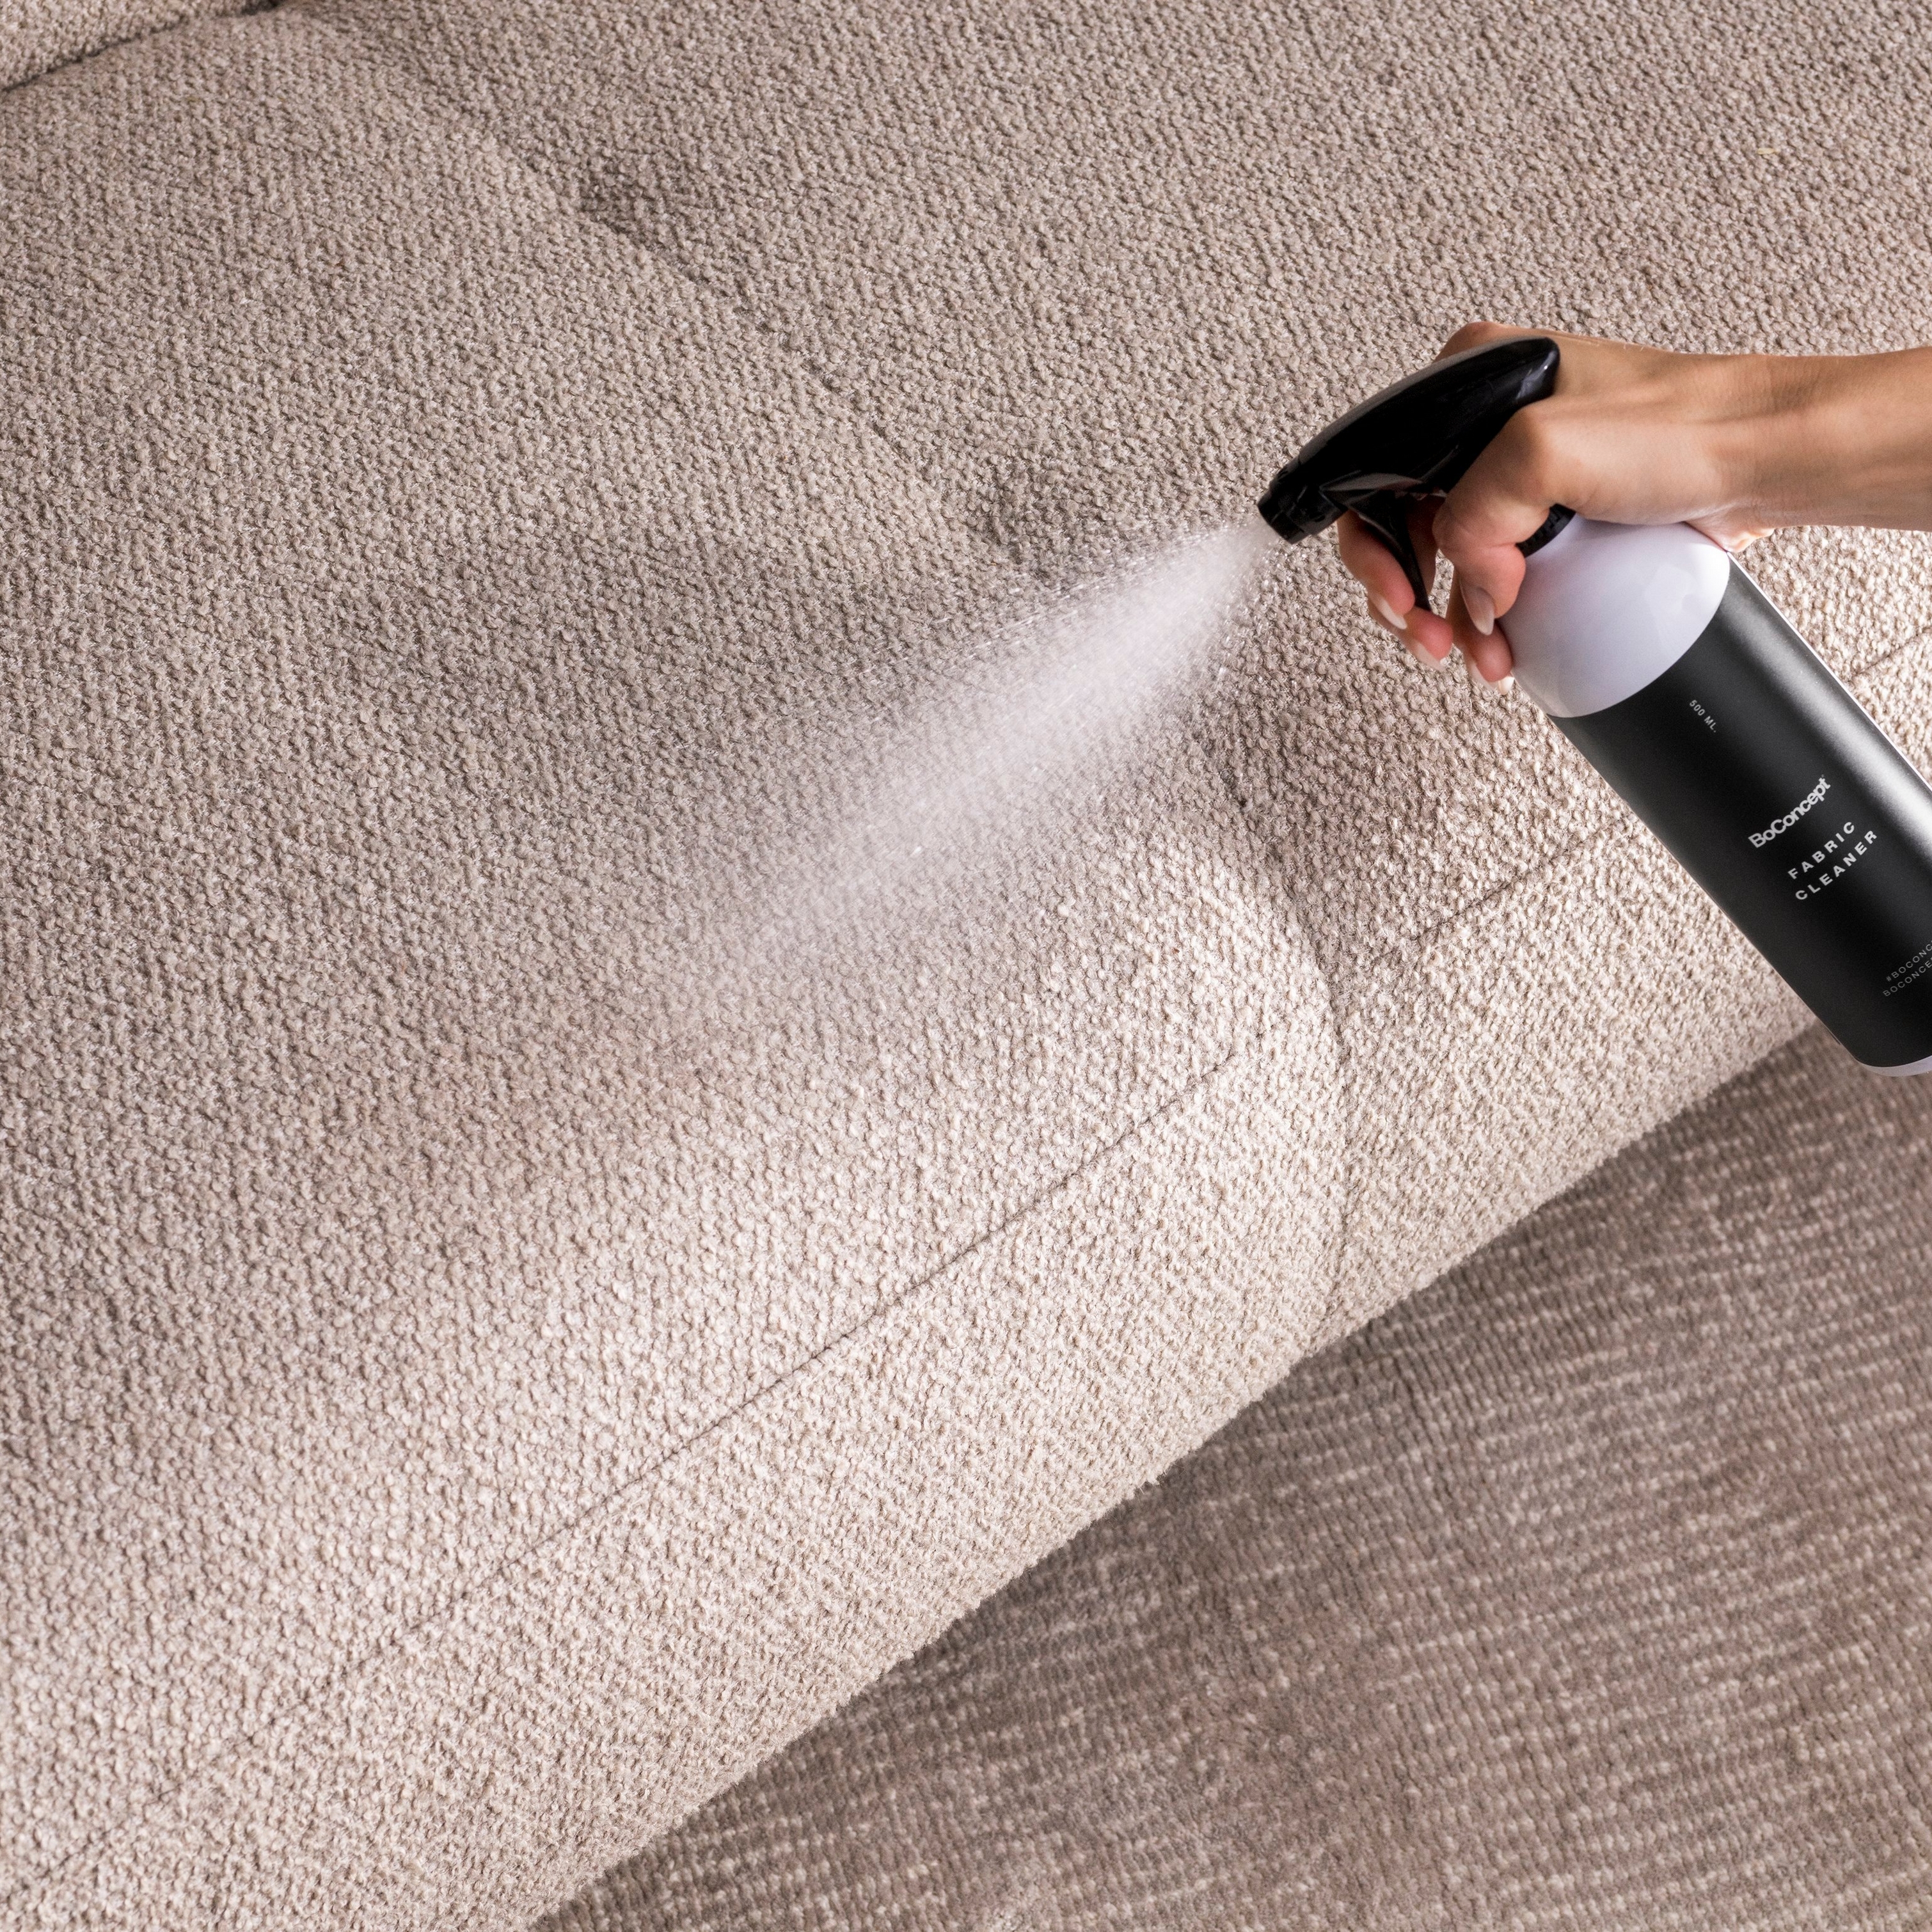 BoConcept fabric care spray applied to a beige surface.